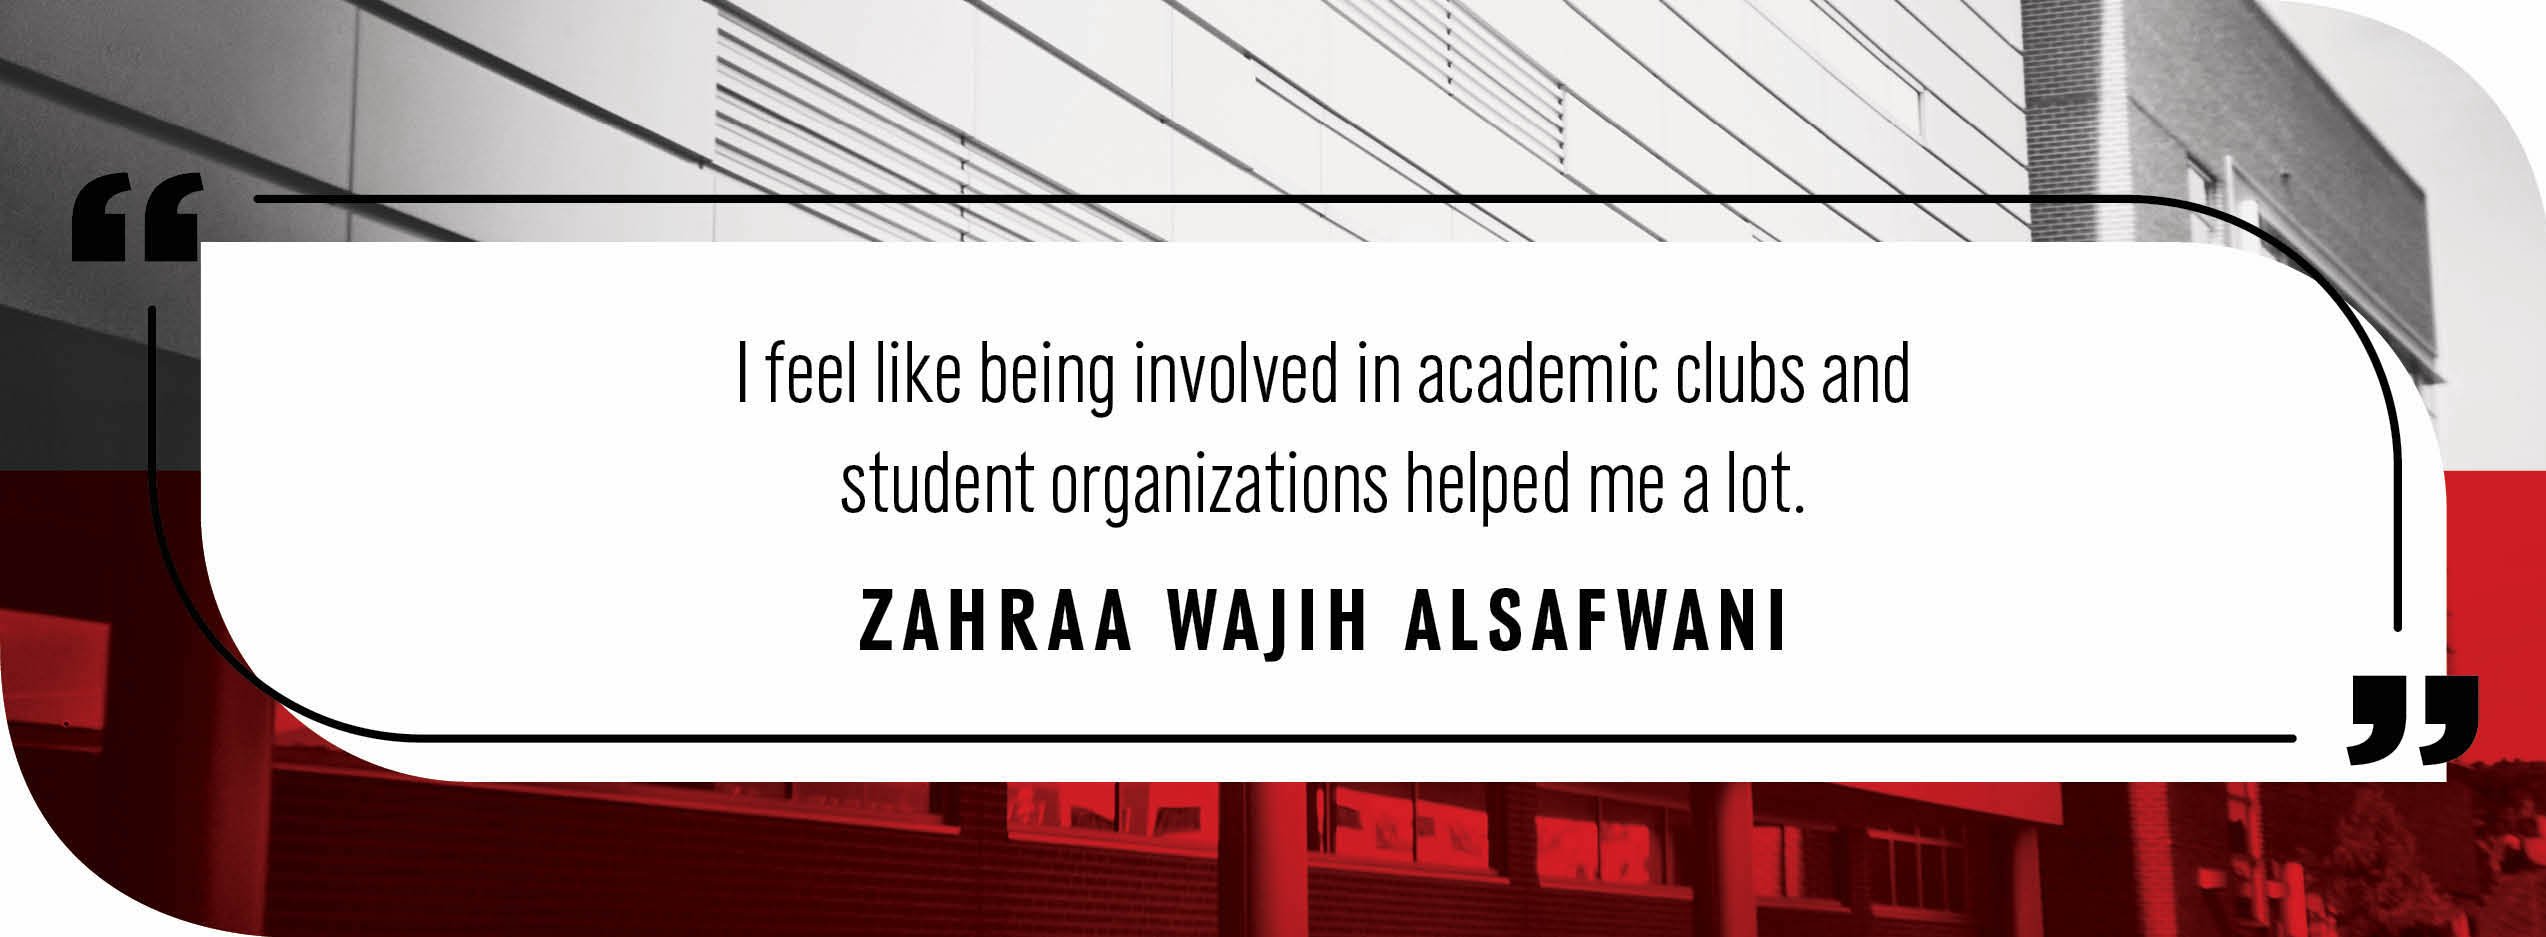 Quote by Zahraa Waji Alsafawni: "I feel like being involved in academic clubs and student organizations helped me a lot."